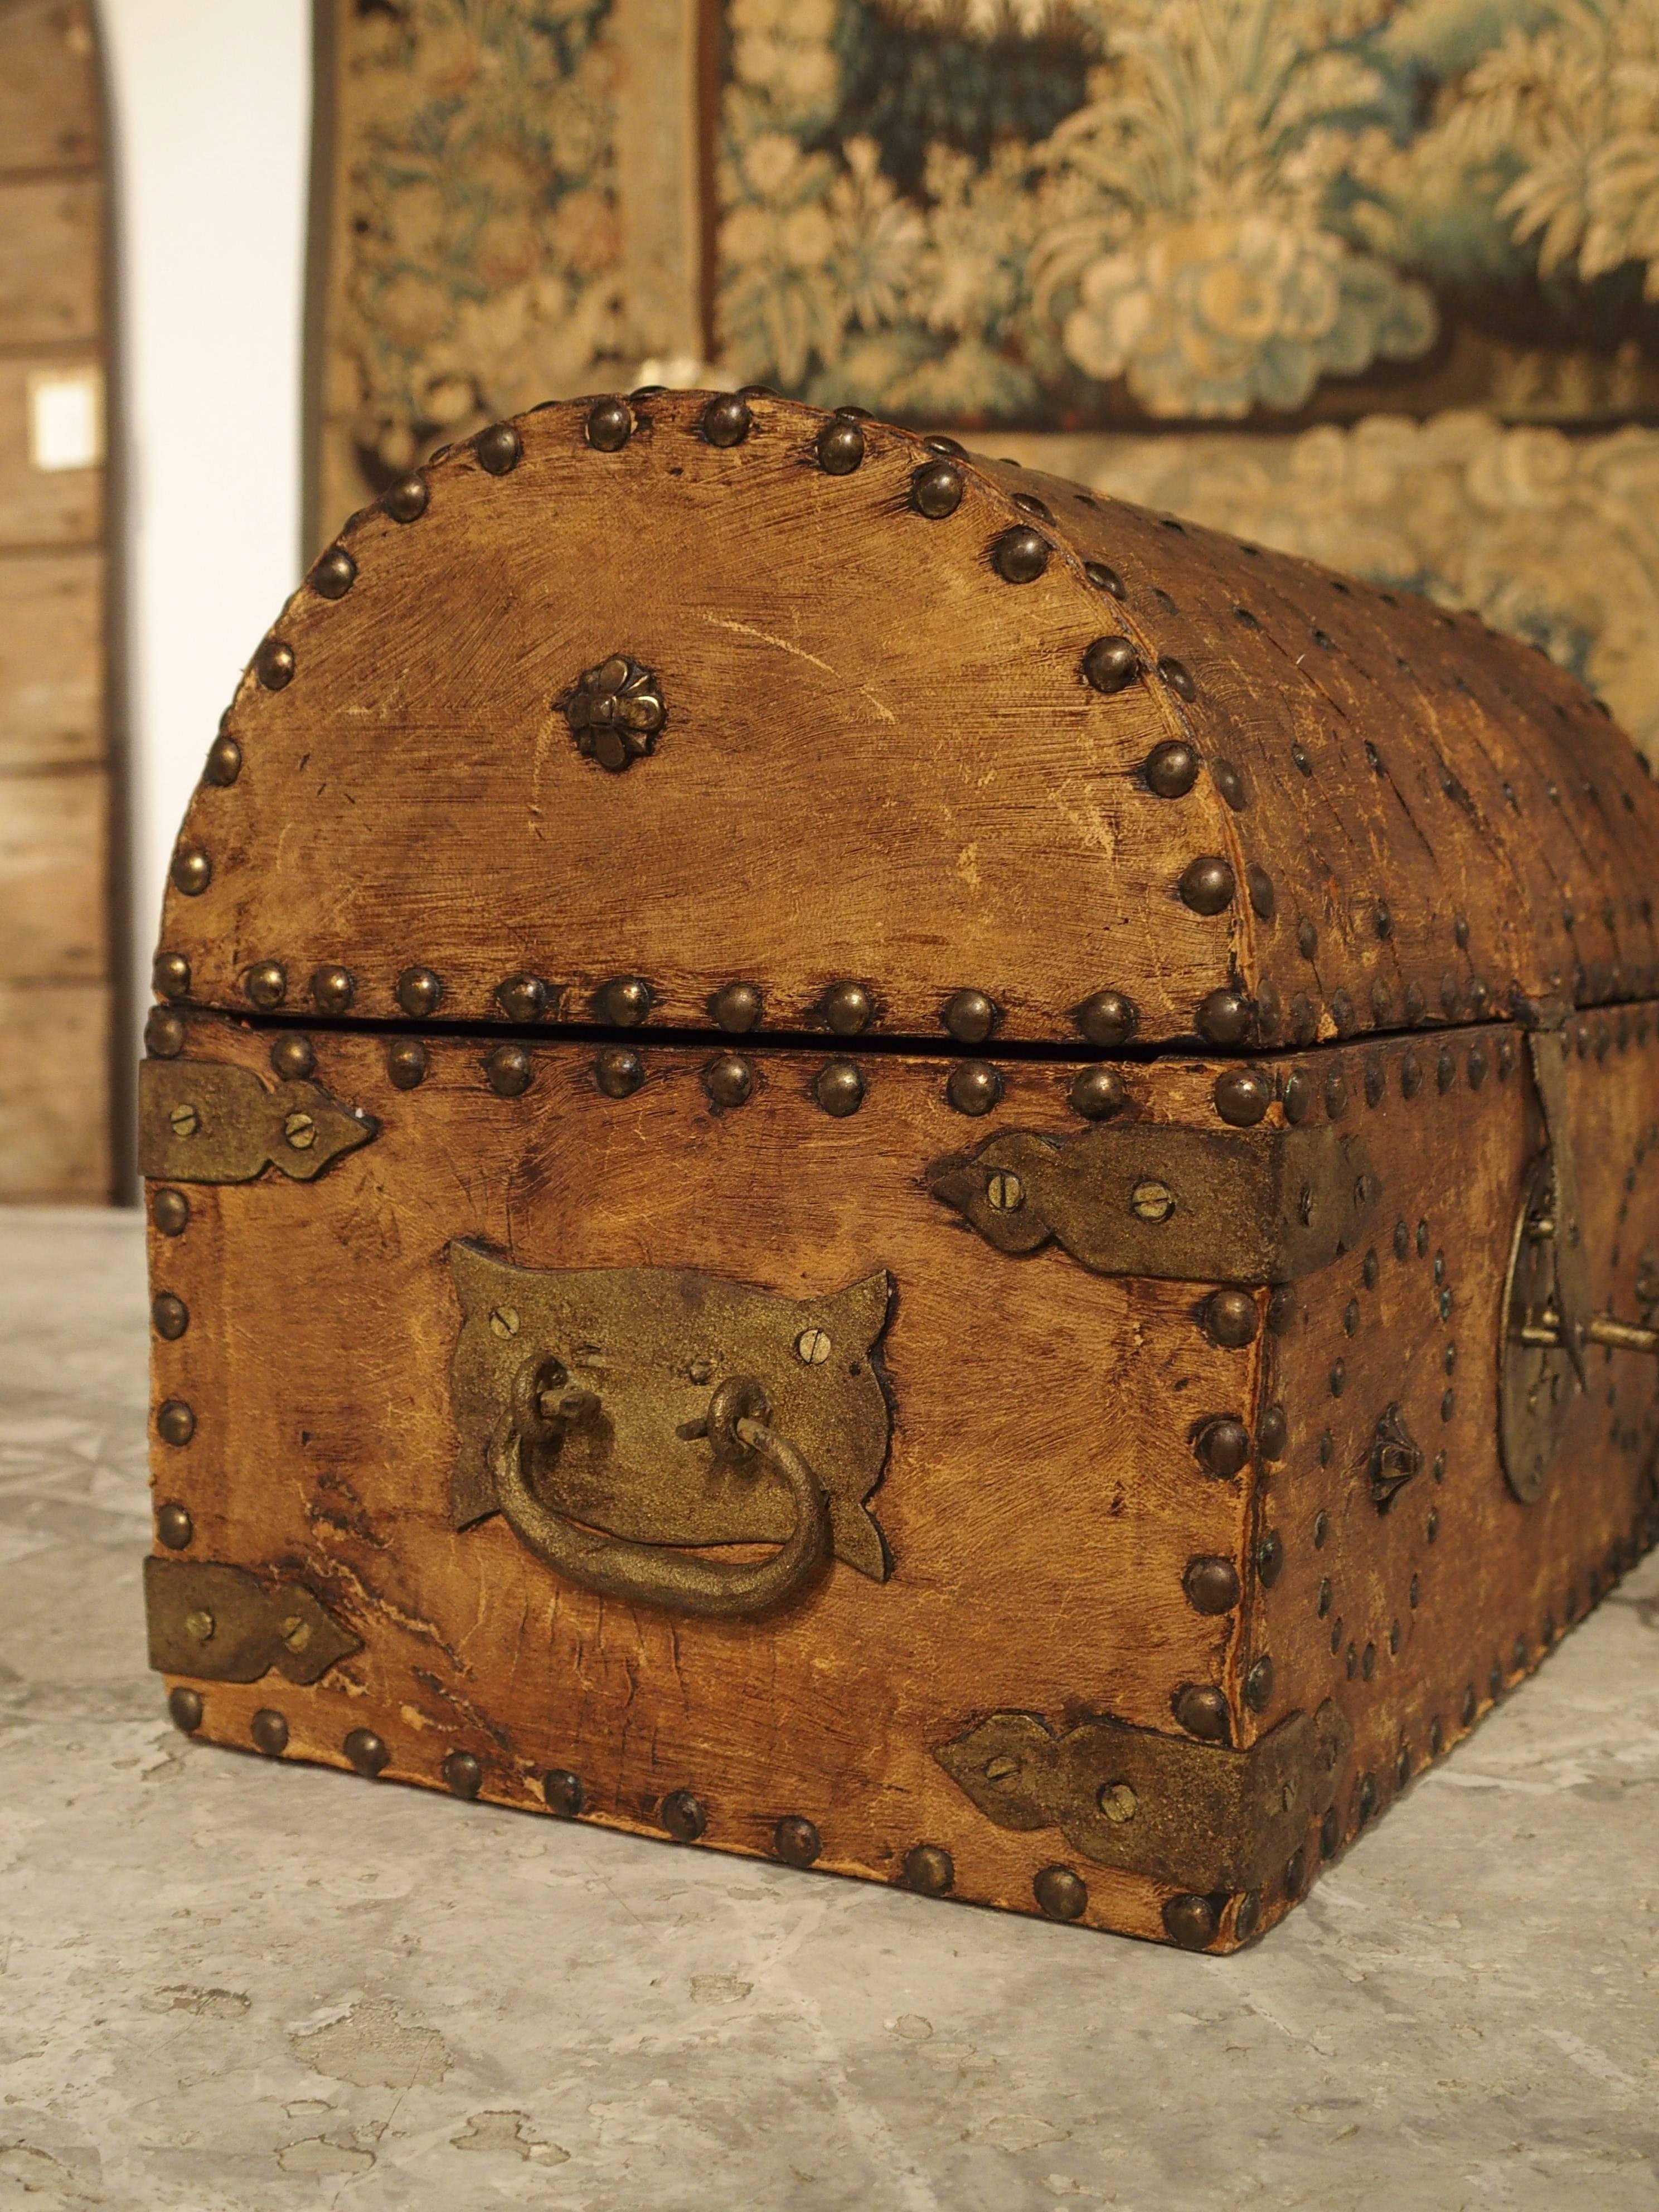 This decorative tabletop trunk is from Europe and dates to the end of the 19th century. It has diagonal, patterned ground motifs on its domed top. Small stamped florets are at each centre surrounded by tiny nailheads. The front of the trunk is